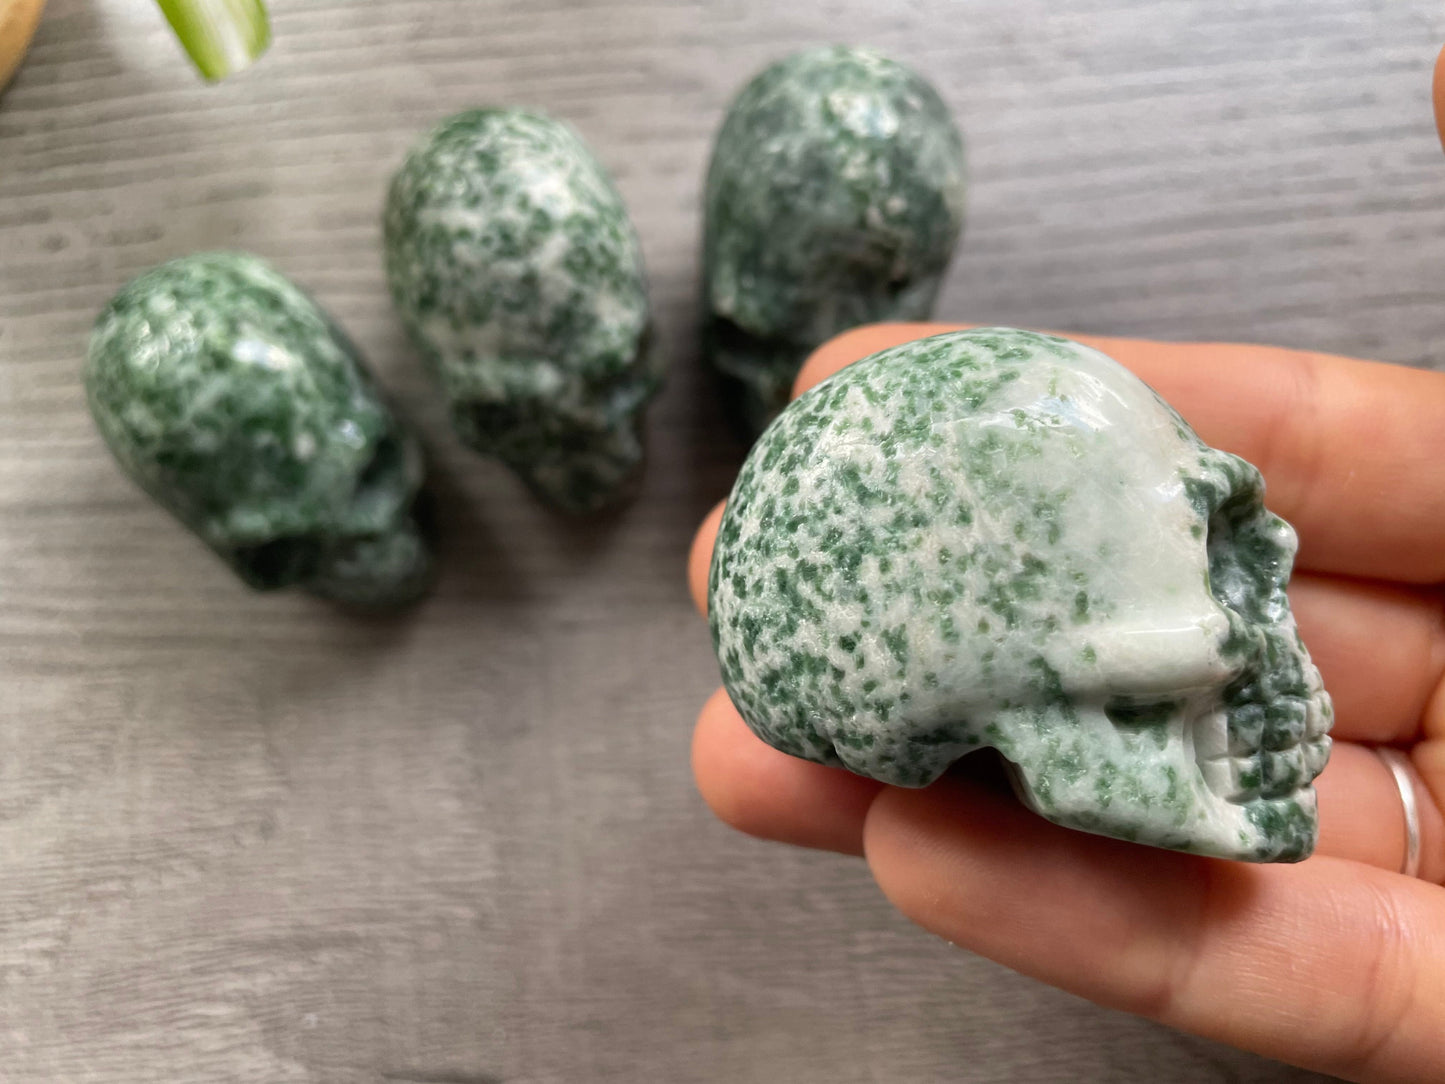 Pictured are various small skulls carved out of ching hai "jade"